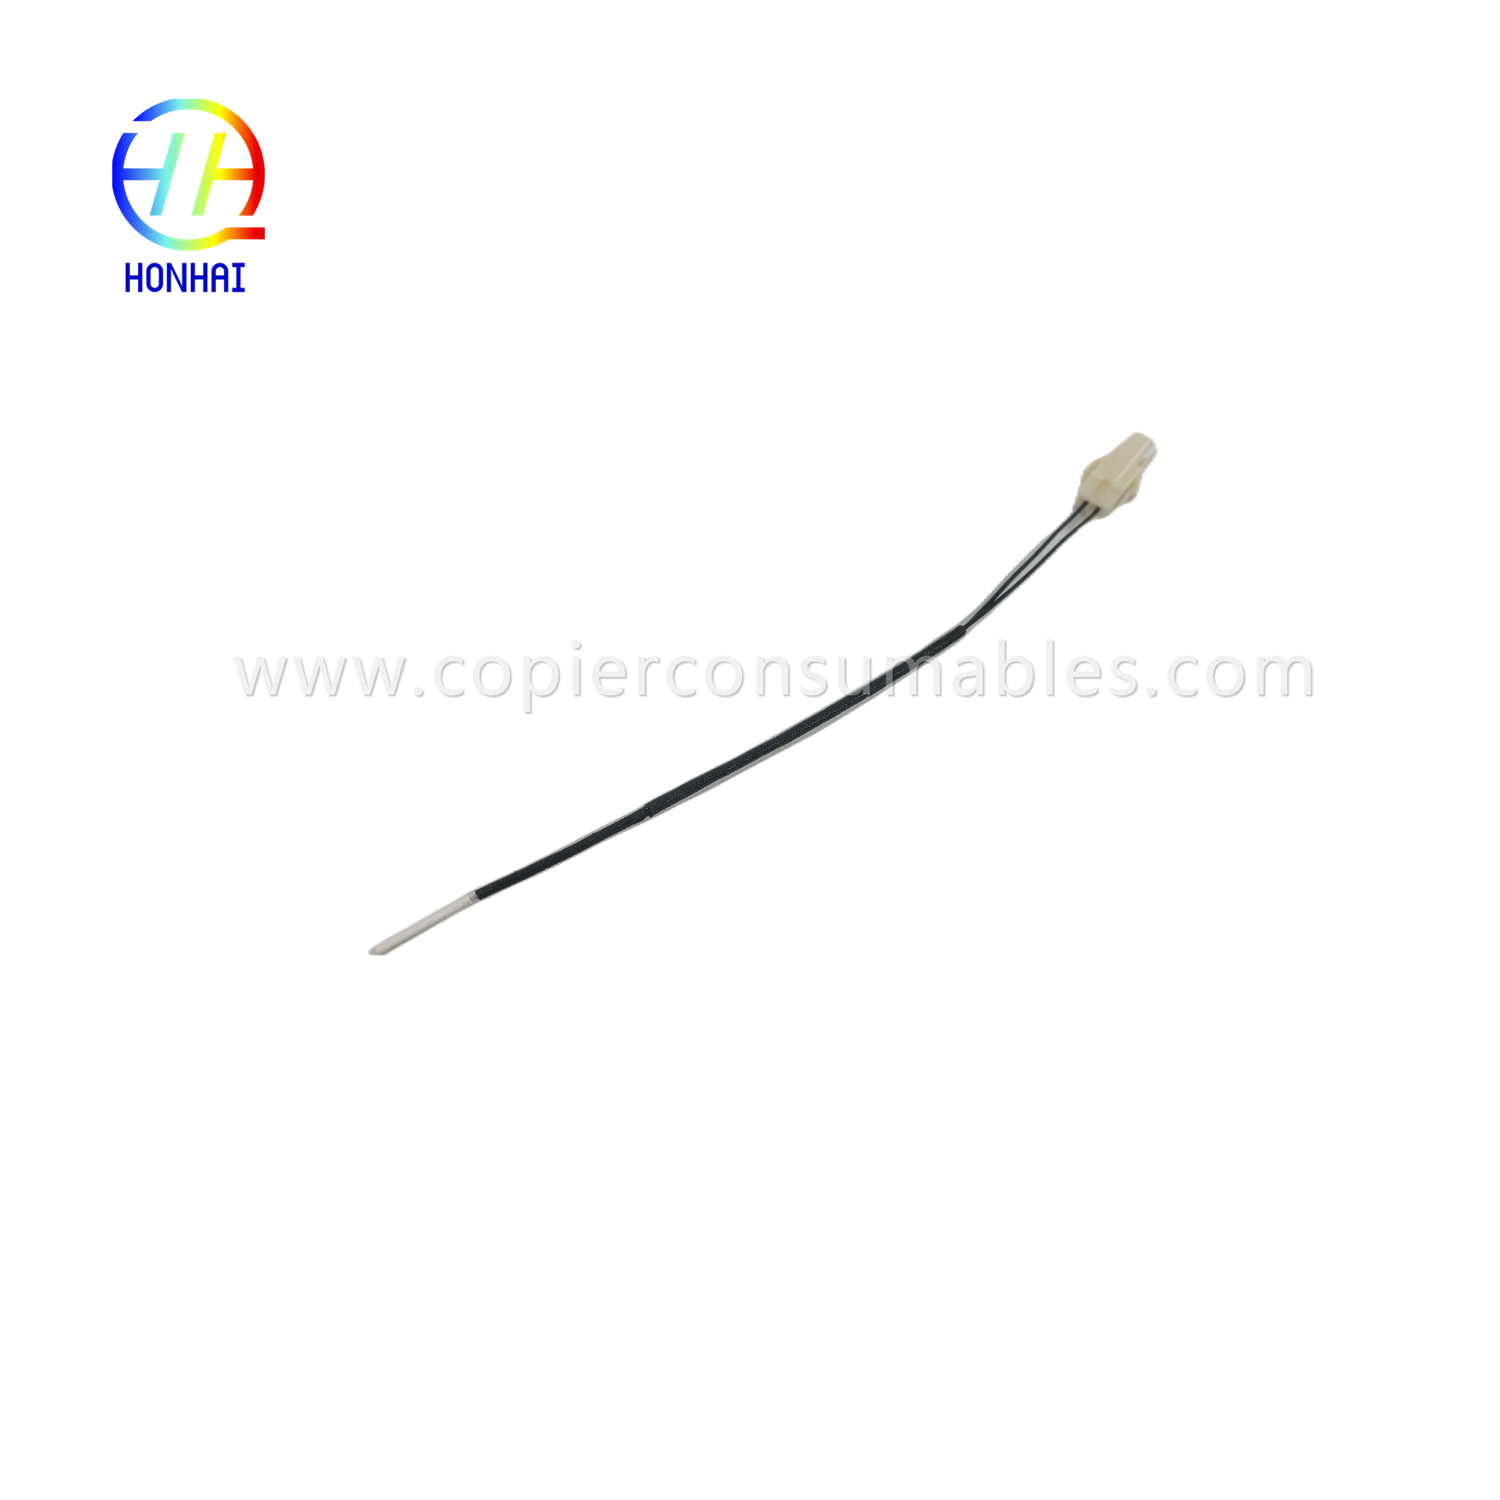 Fuser Thermistor ho an'ny OCE Pw300 340 350 360 365 TDS100 320 400 450 500 7050 9300 9400